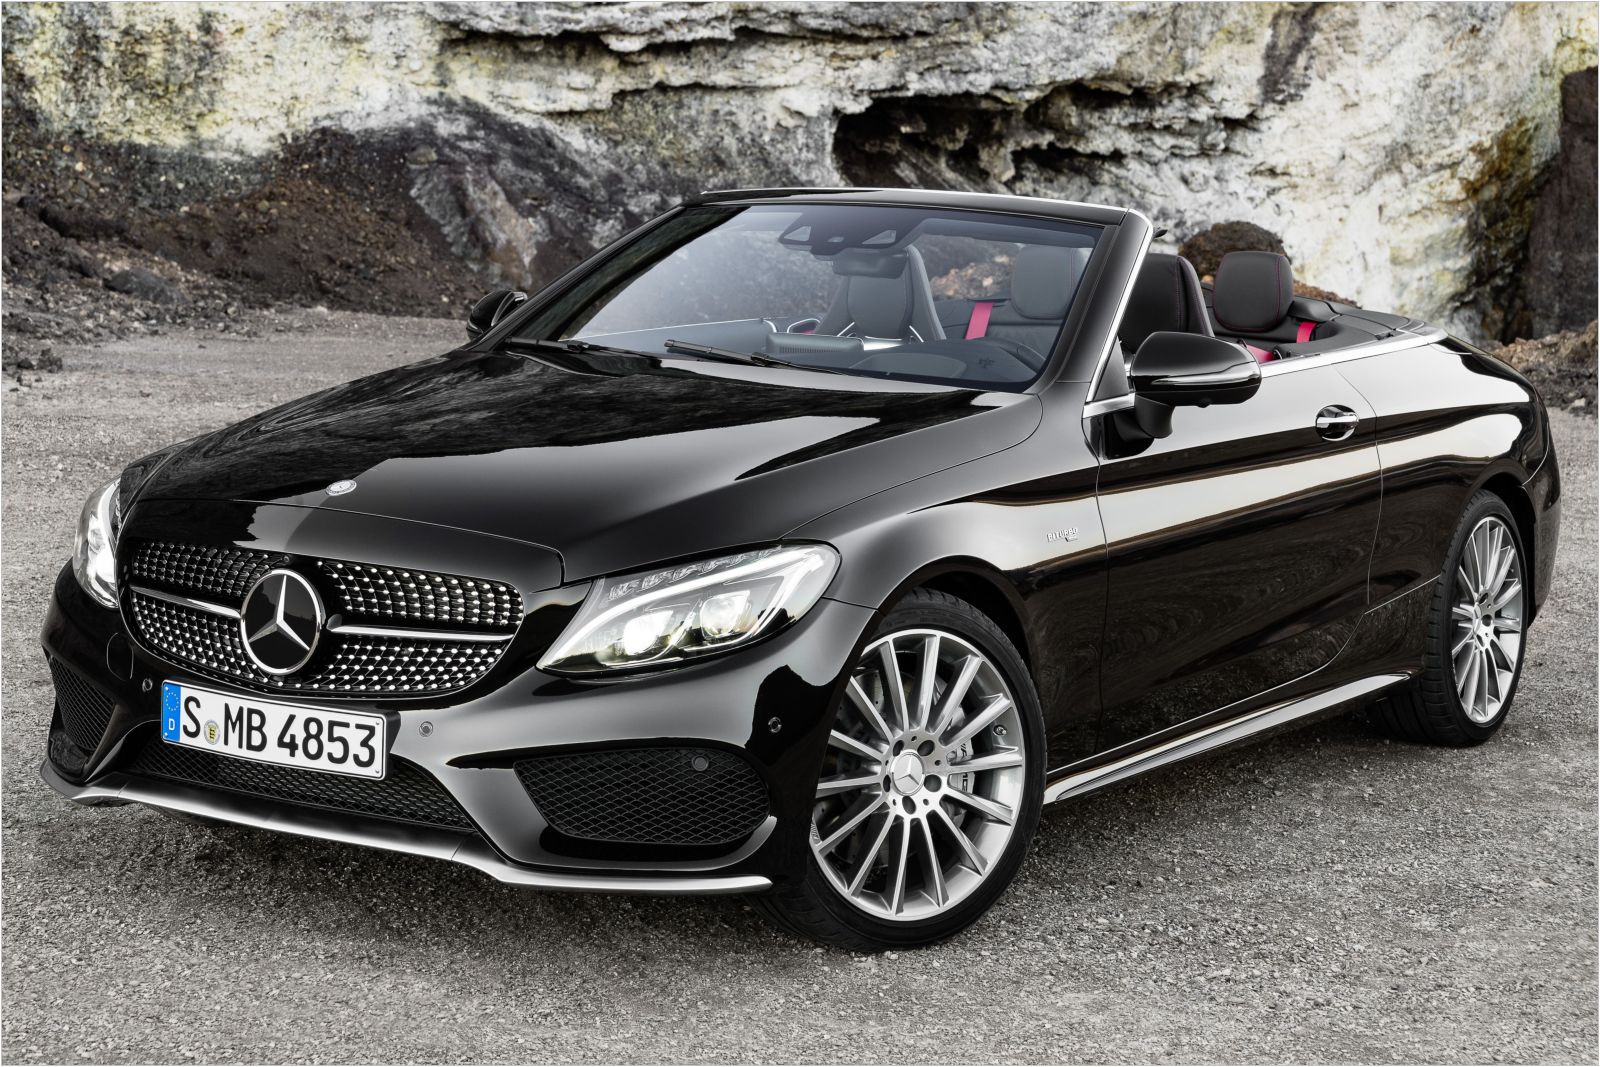 Mercedes-Benz C43 AMG 4Matic Cabriolet, 1600x1067px, img-1